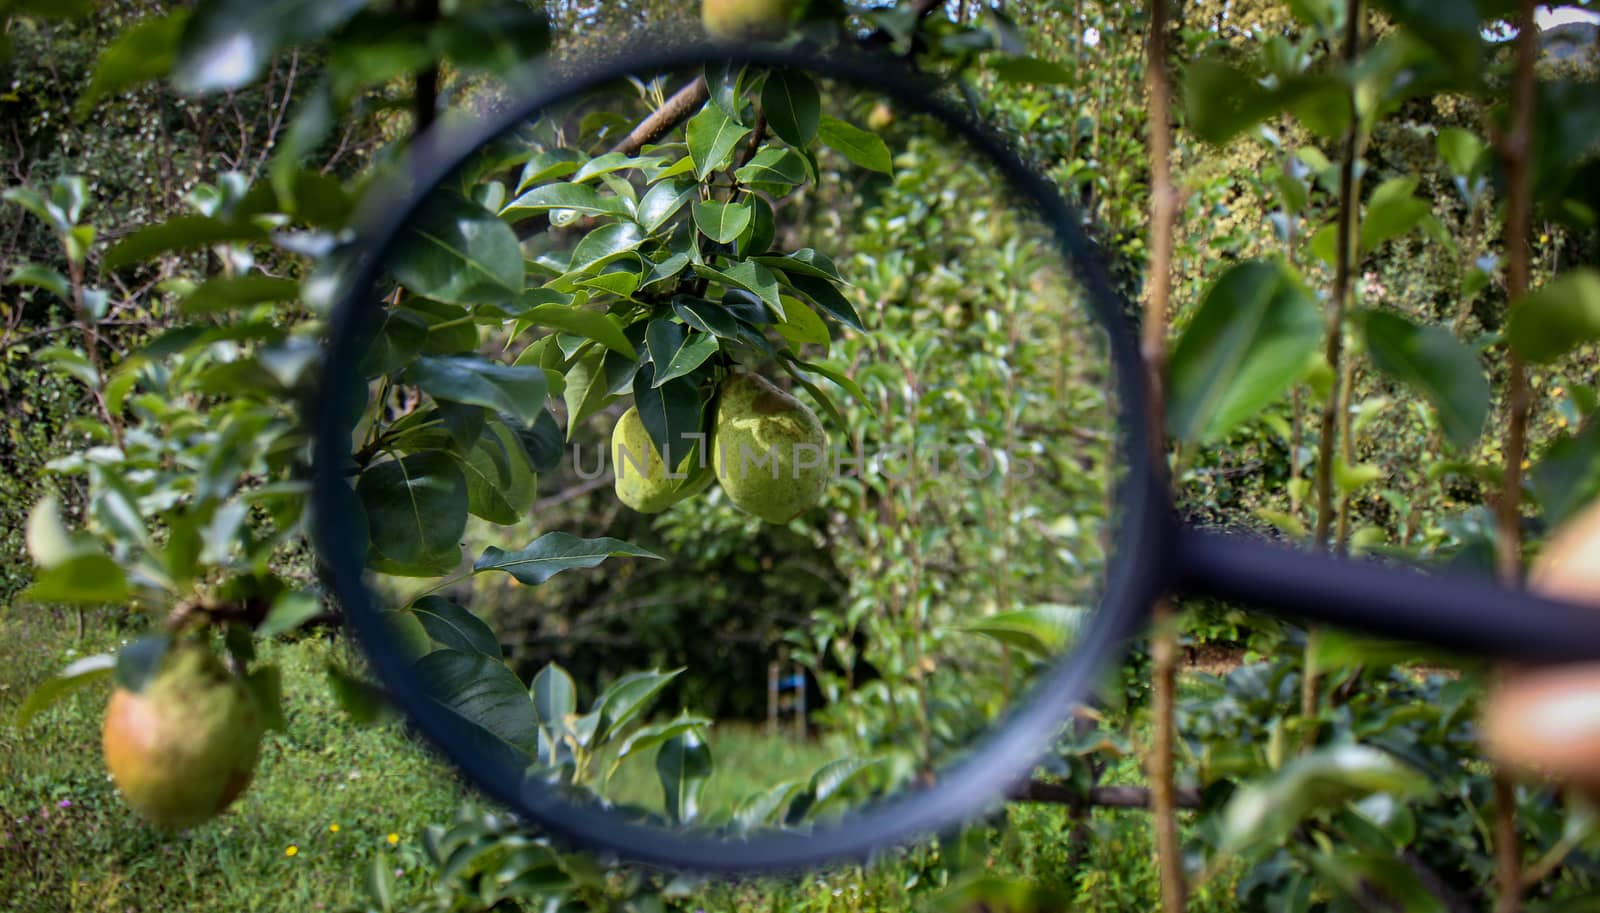 Two unripe green pears on a branch magnified with a magnifying glass. Other pears and an orchard can be seen in the background. Zavidovici, Bosnia and Herzegovina.